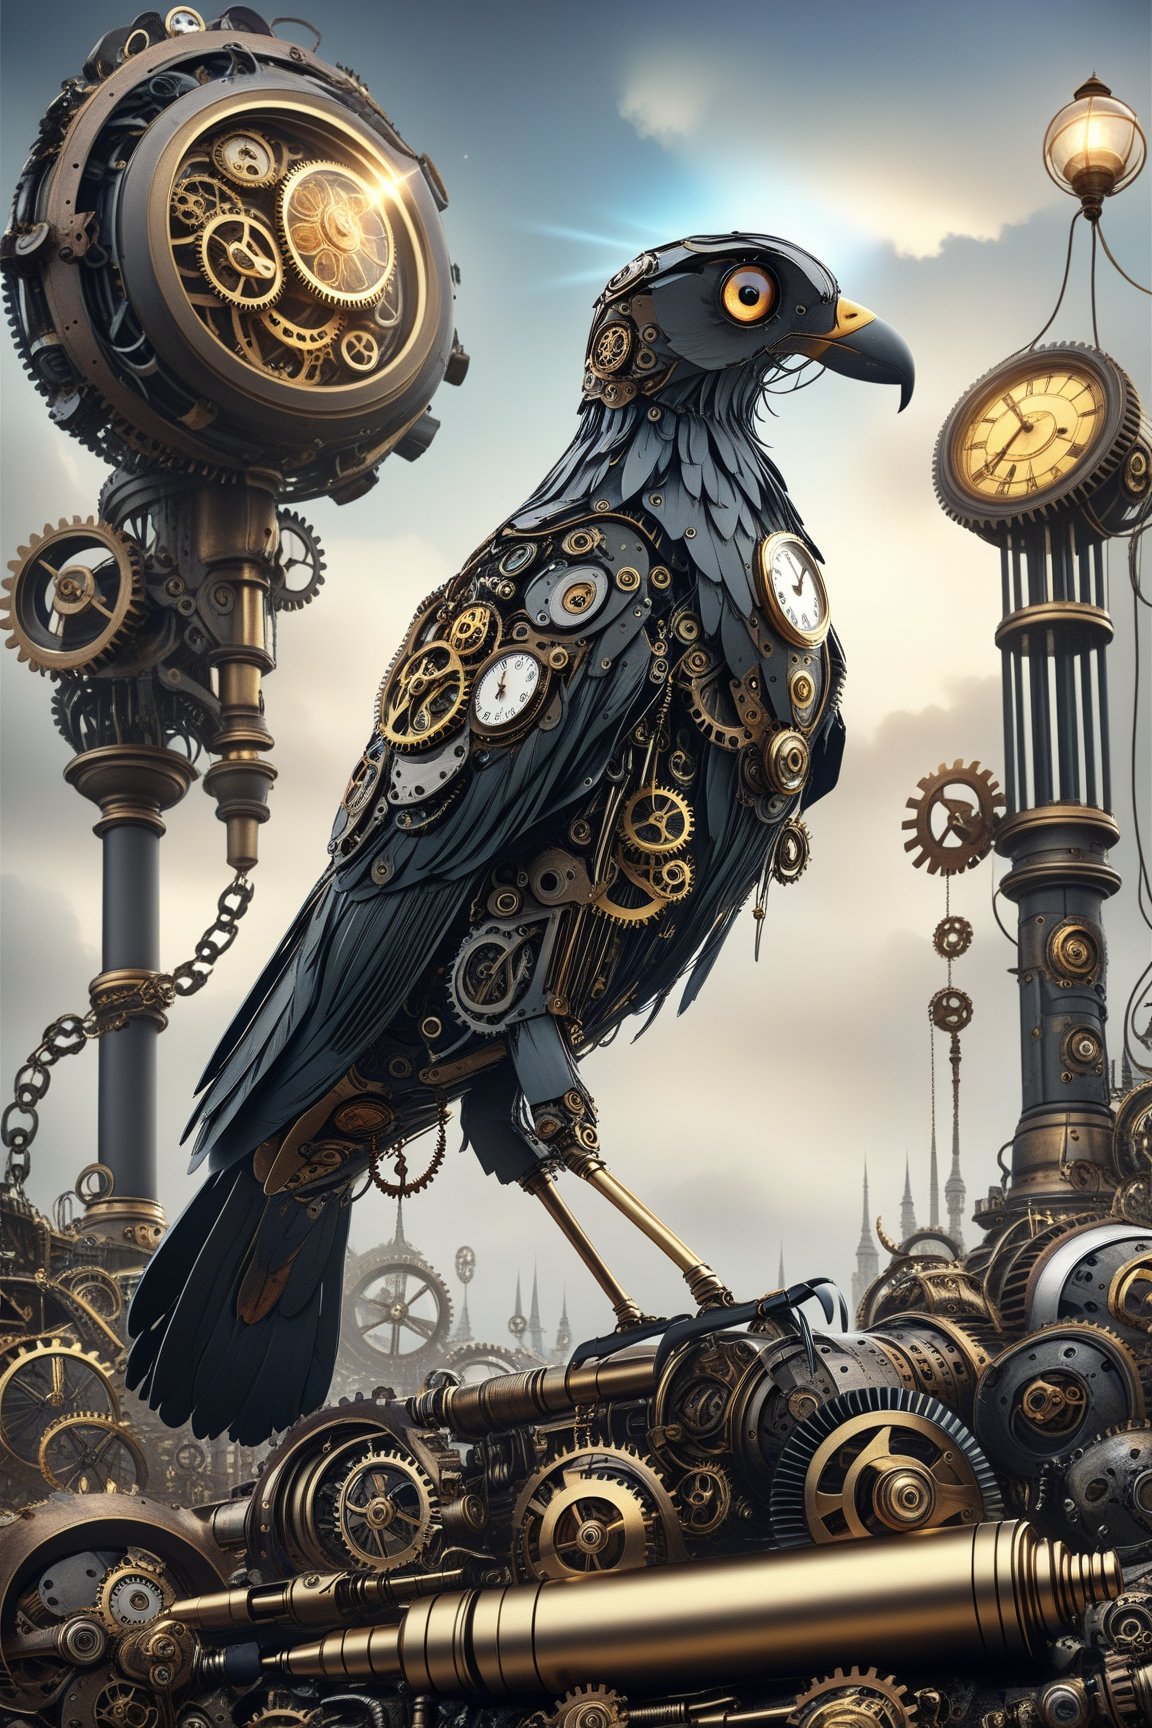 create a beautiful magical steampunk fantasy scene where you can evidence, A mechanical pen that never runs out of ink, emitting flashes of constant creativity..,Mechanical,DonMSt34mPXL